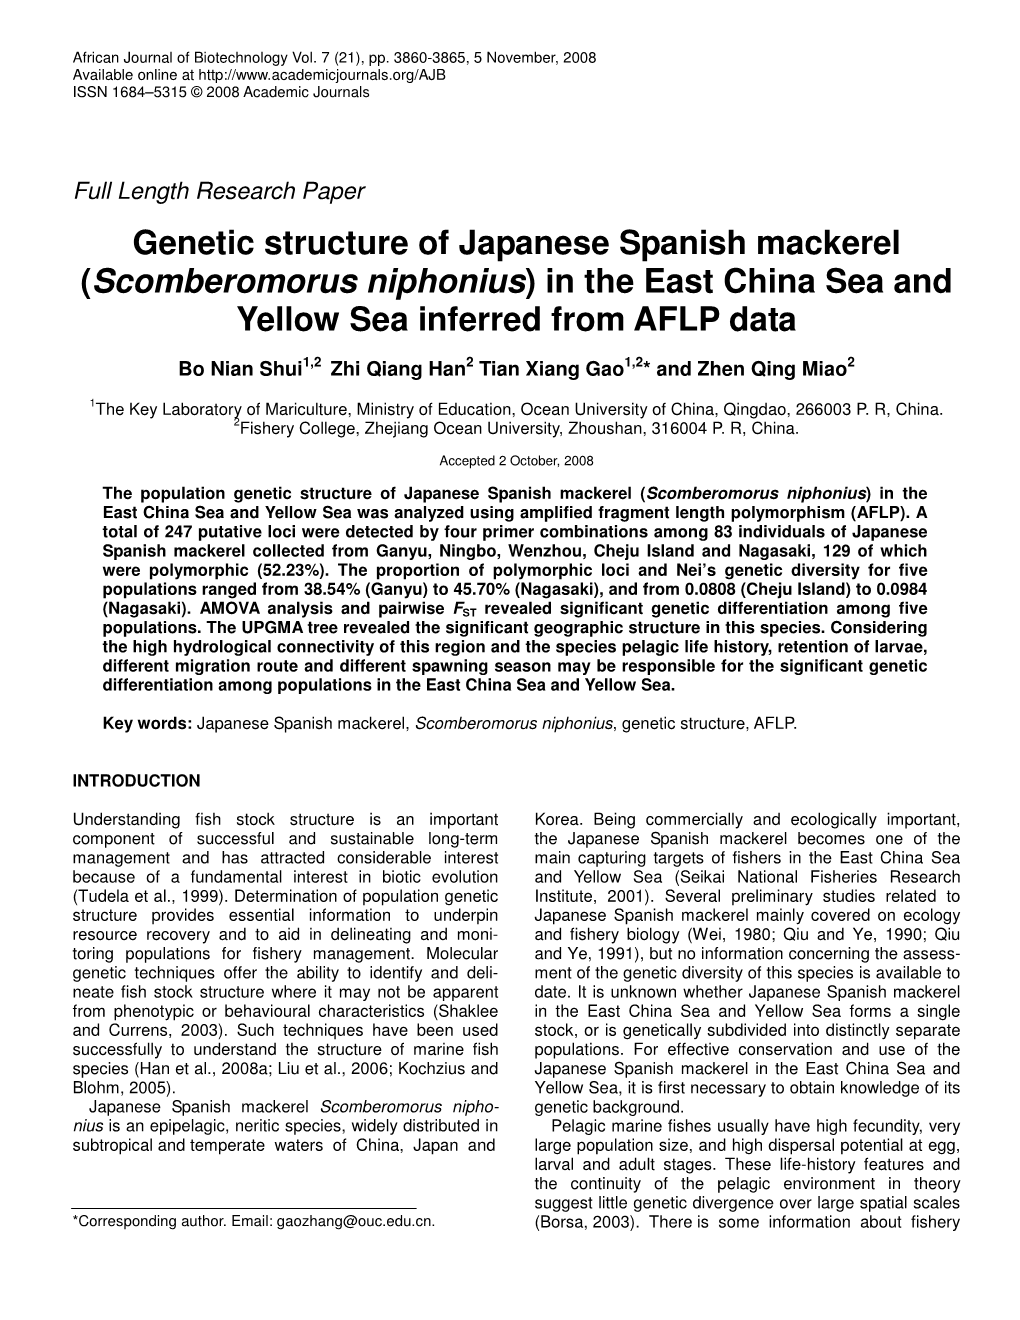 Genetic Structure of Japanese Spanish Mackerel (Scomberomorus Niphonius) in the East China Sea and Yellow Sea Inferred from AFLP Data